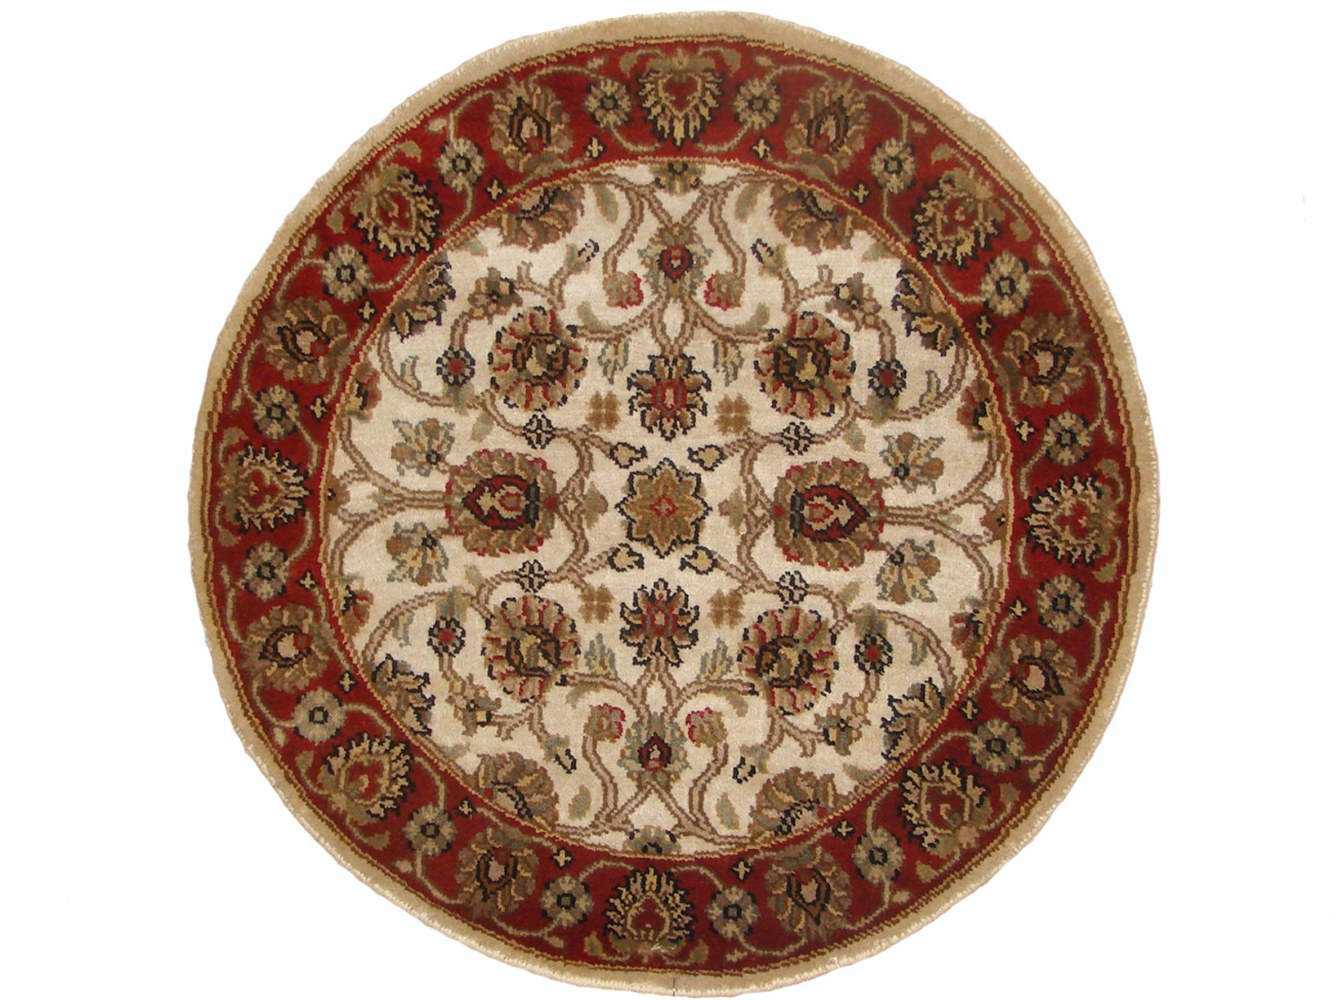 3 ft. Round & Square Jaipur Hand Knotted Wool Area Rug - MR19195